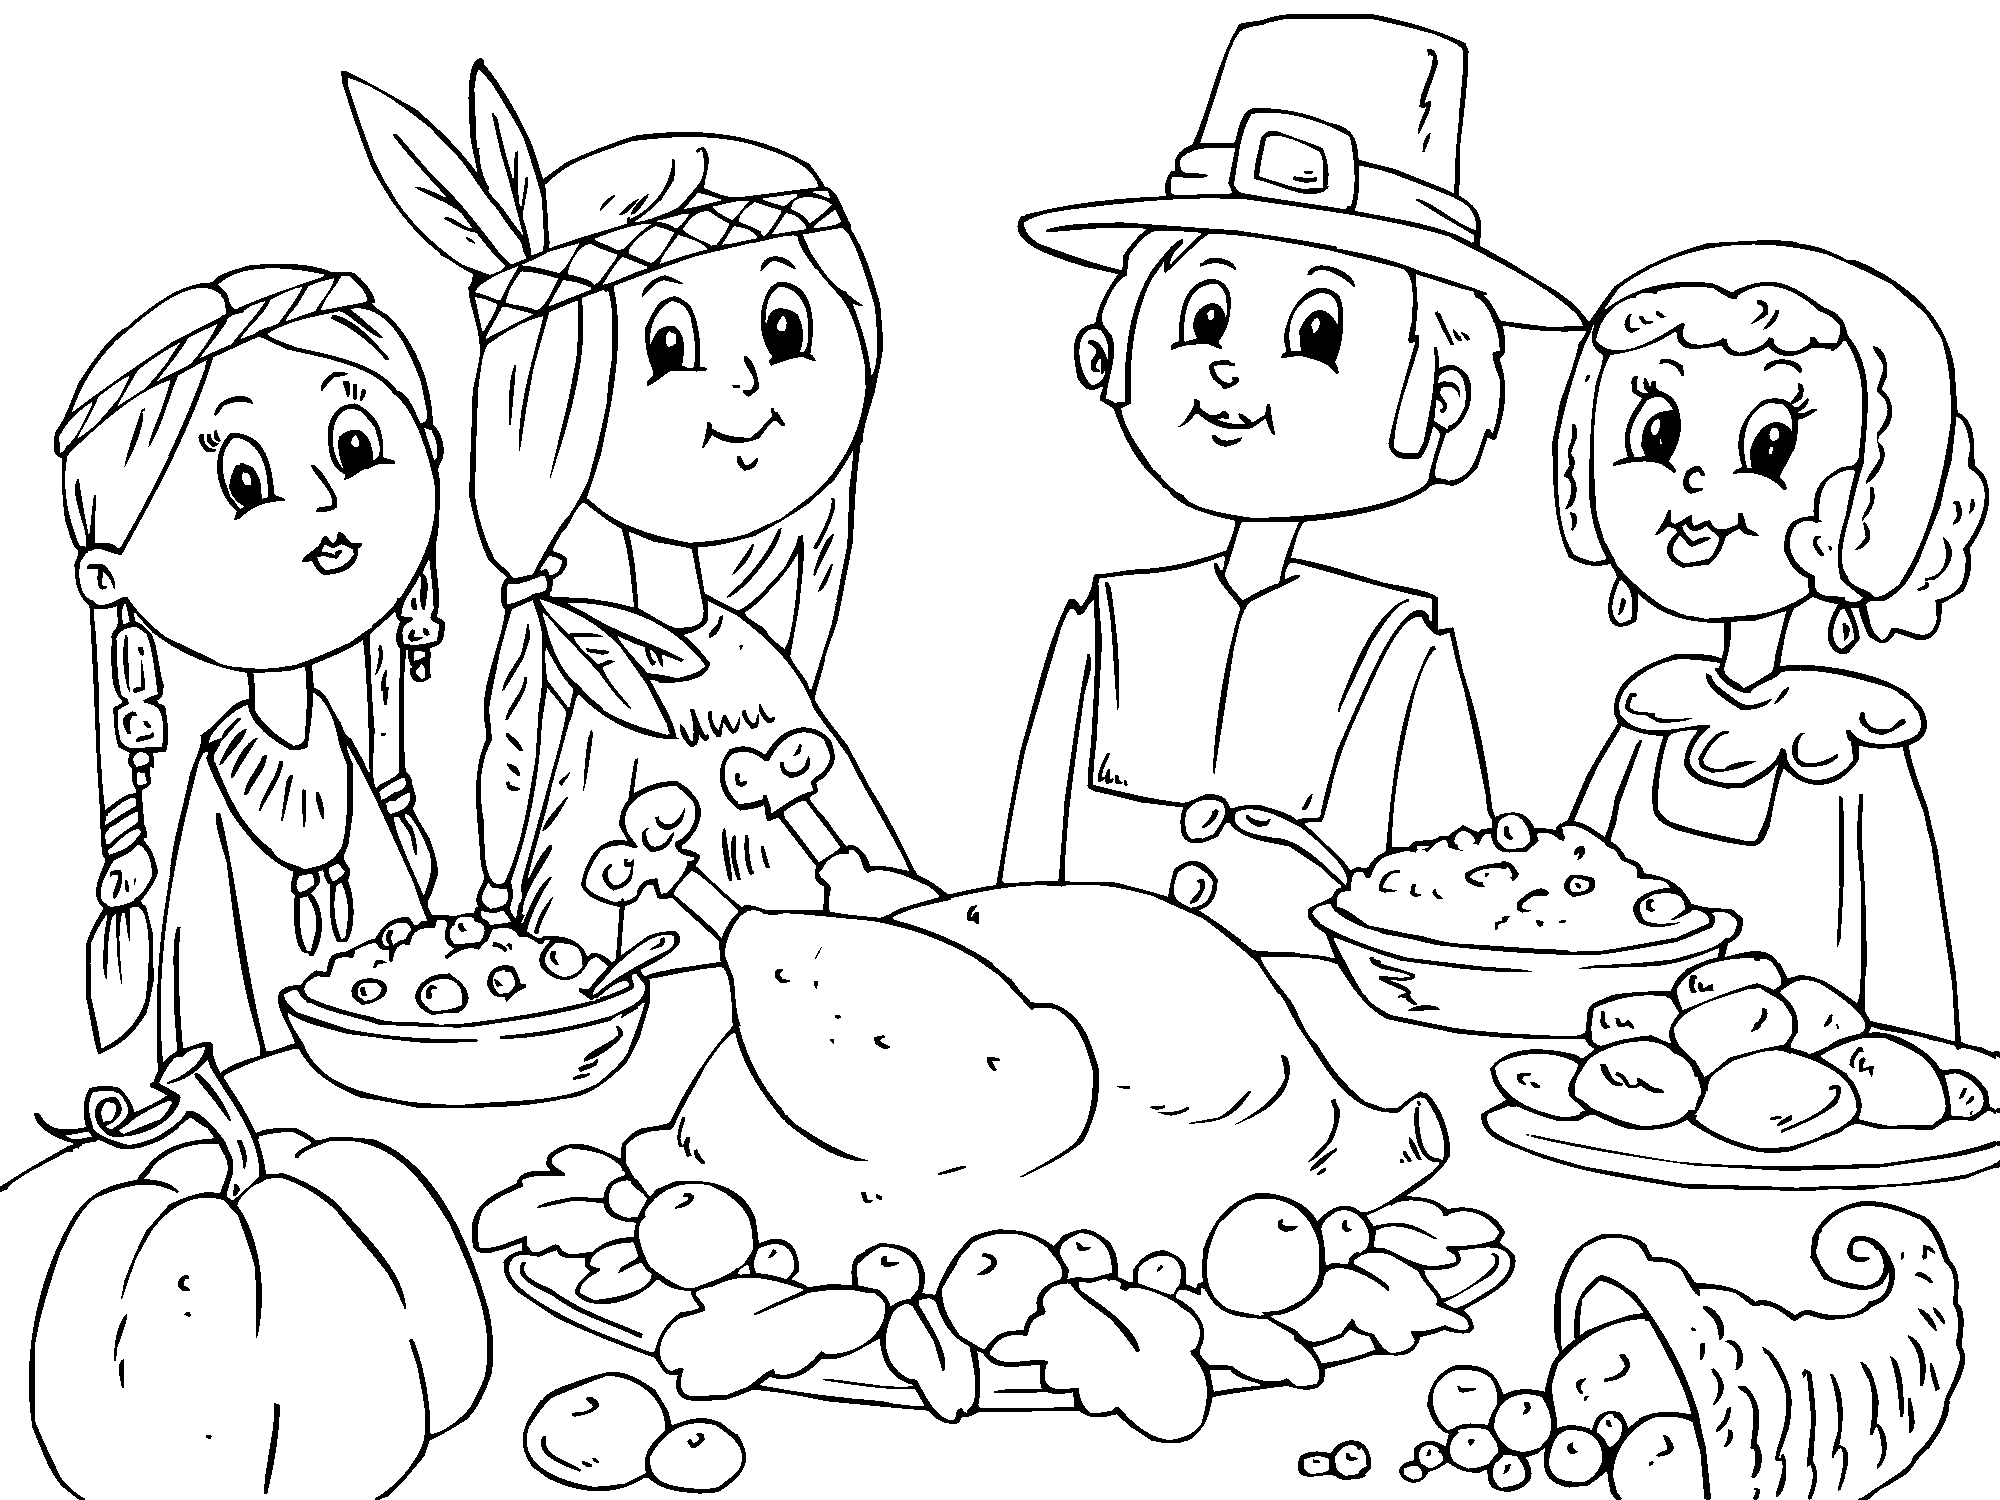 Thanksgiving day coloring pages crafts and worksheets for preschooltoddler and kindergarten